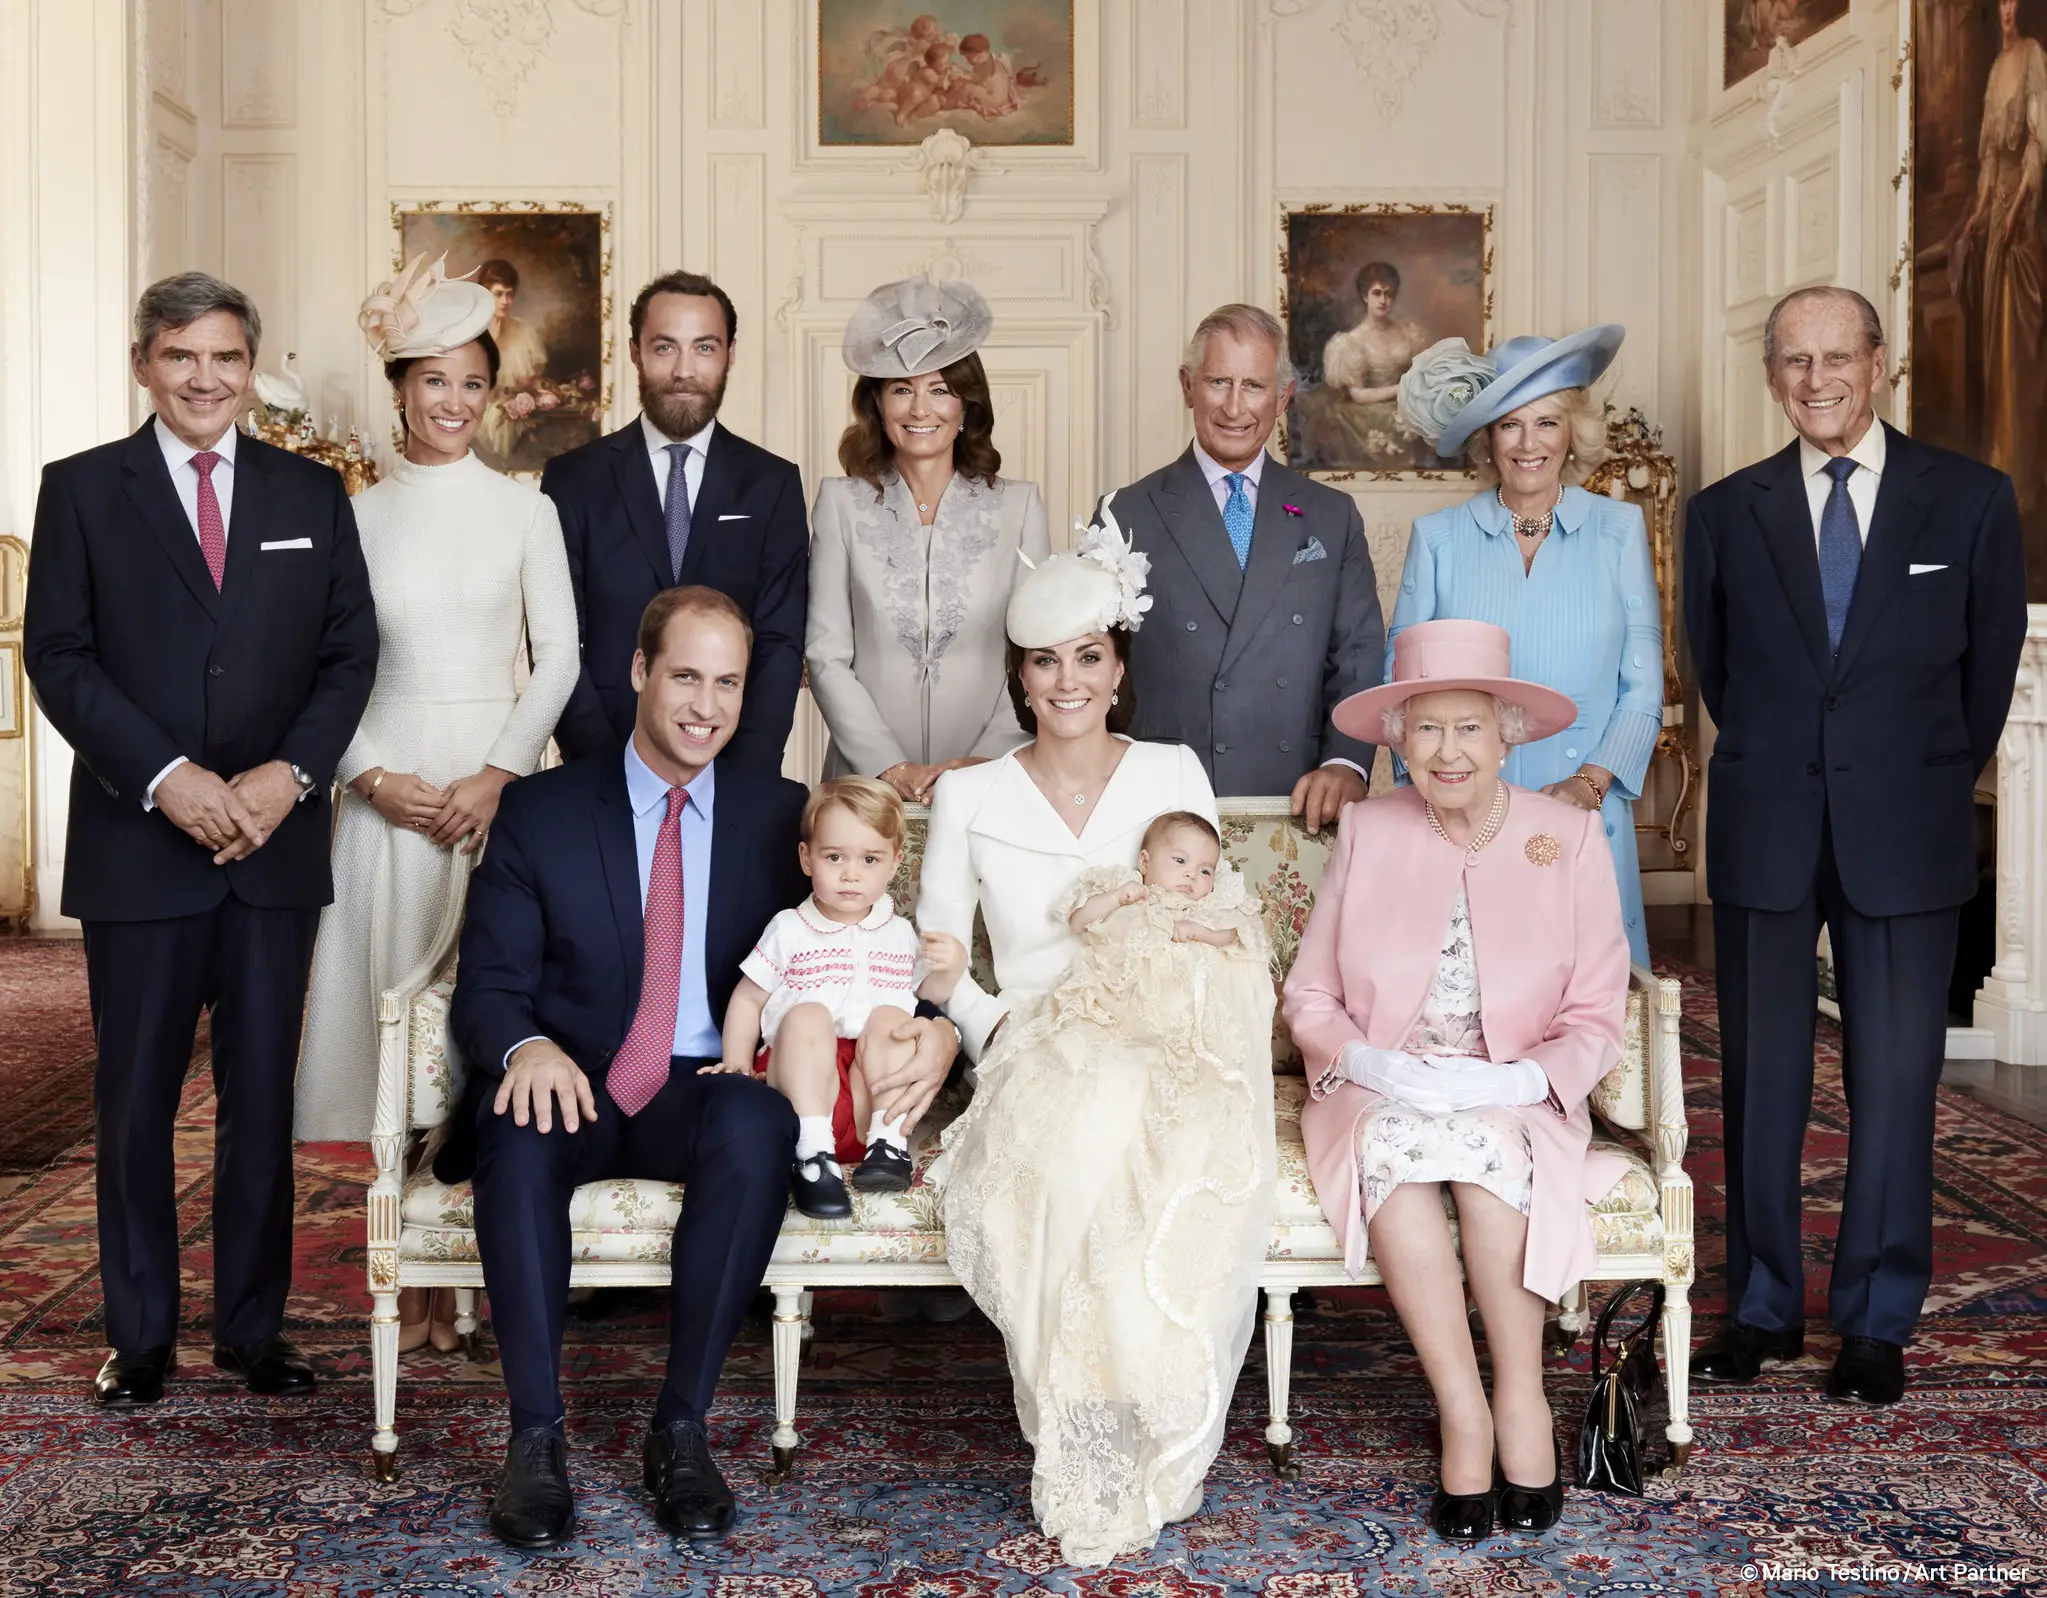 The Duke and Duchess of Cambridge asked very closest friends and family members to be Charlotte's Godparents